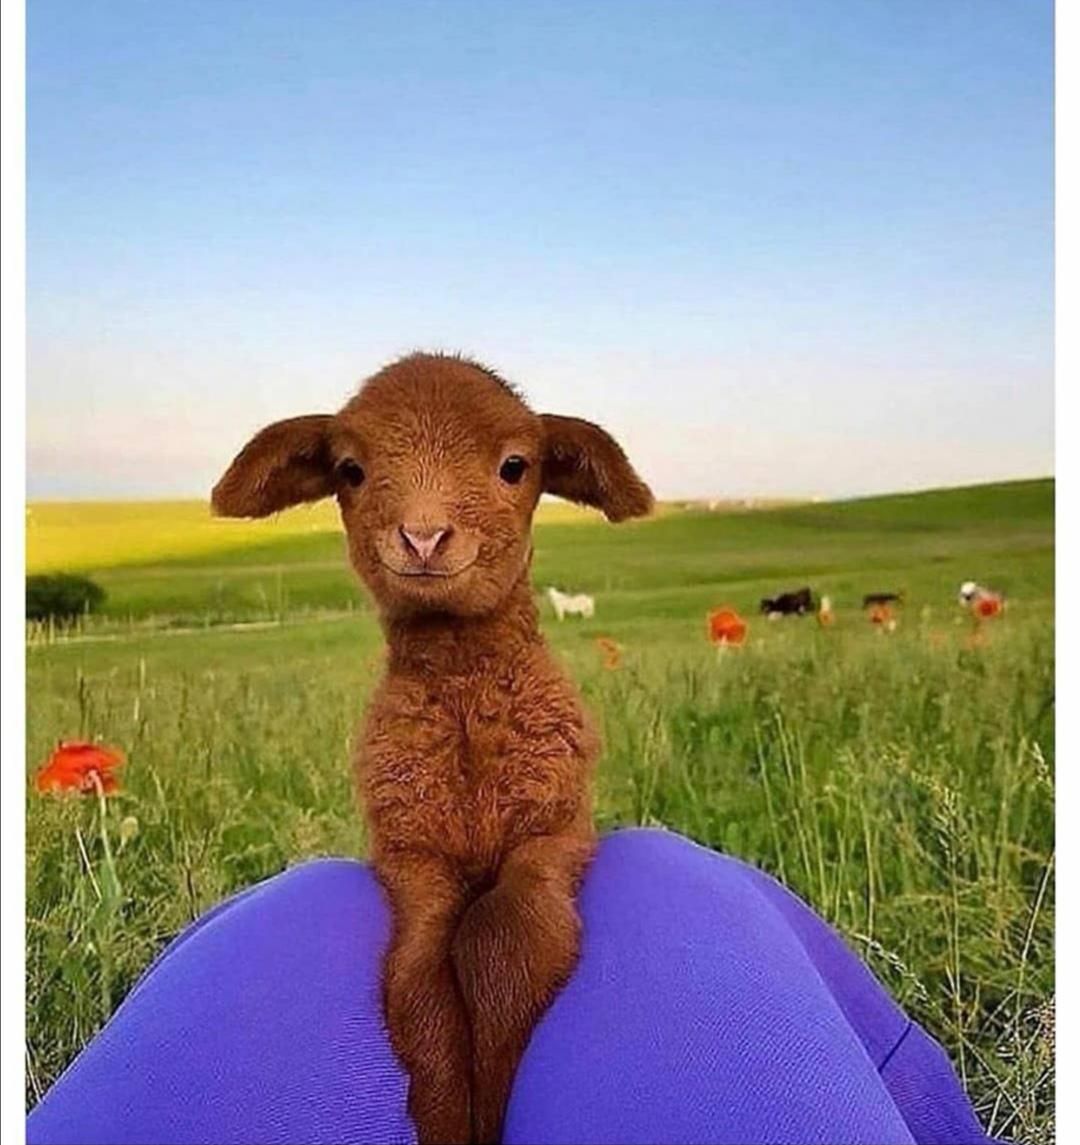 Sometimes you have to take a pause and enjoy a photogenic goat